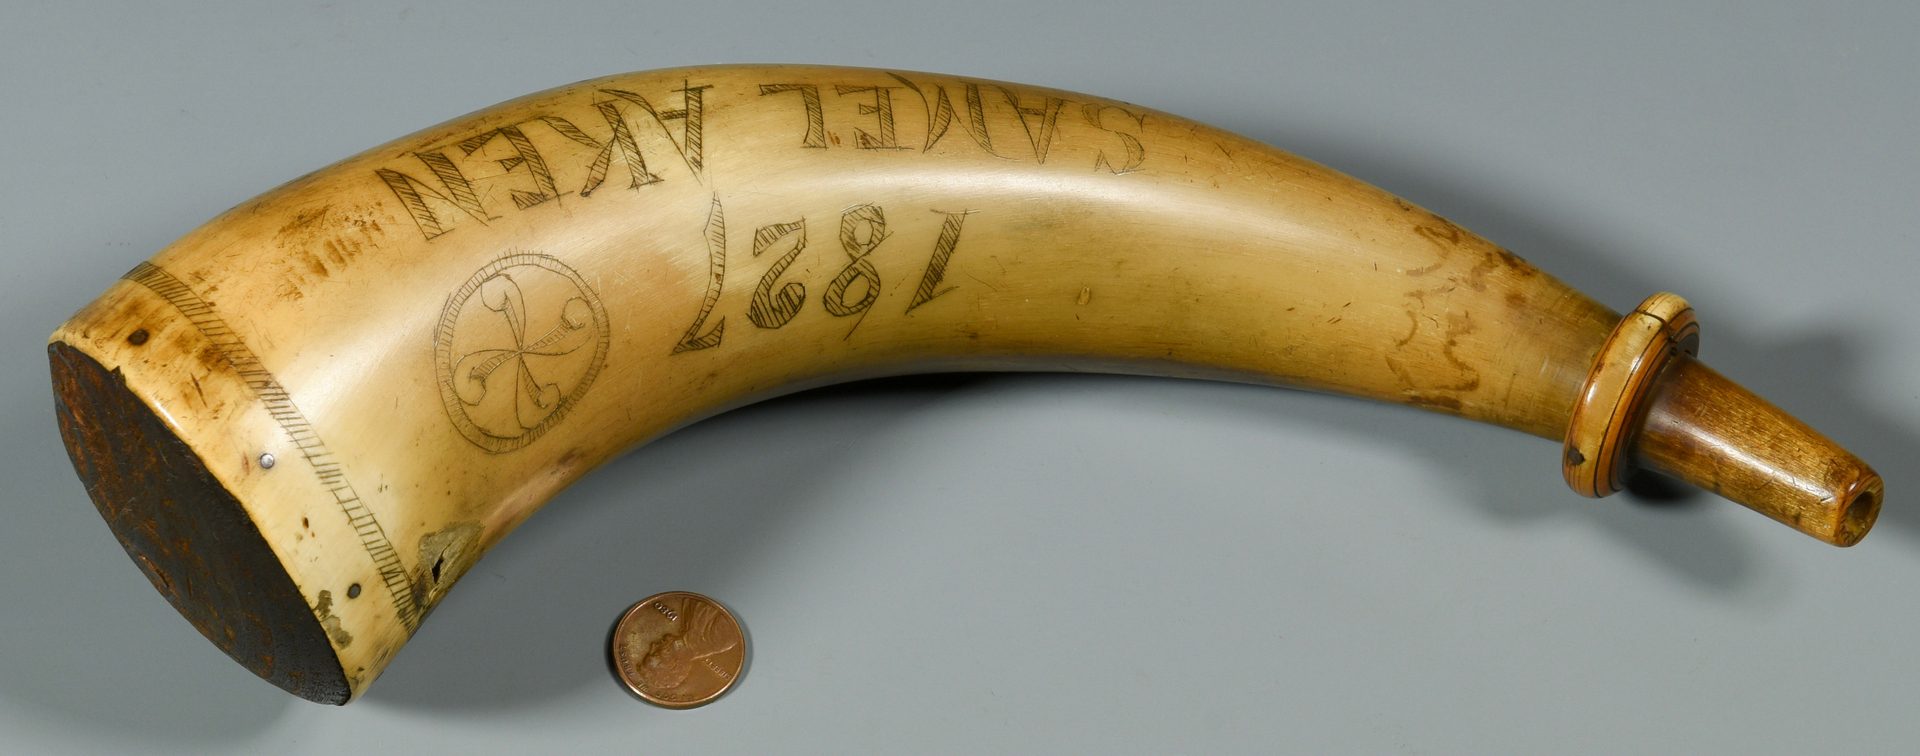 Lot 302: Signed & Dated TN Powder Horn